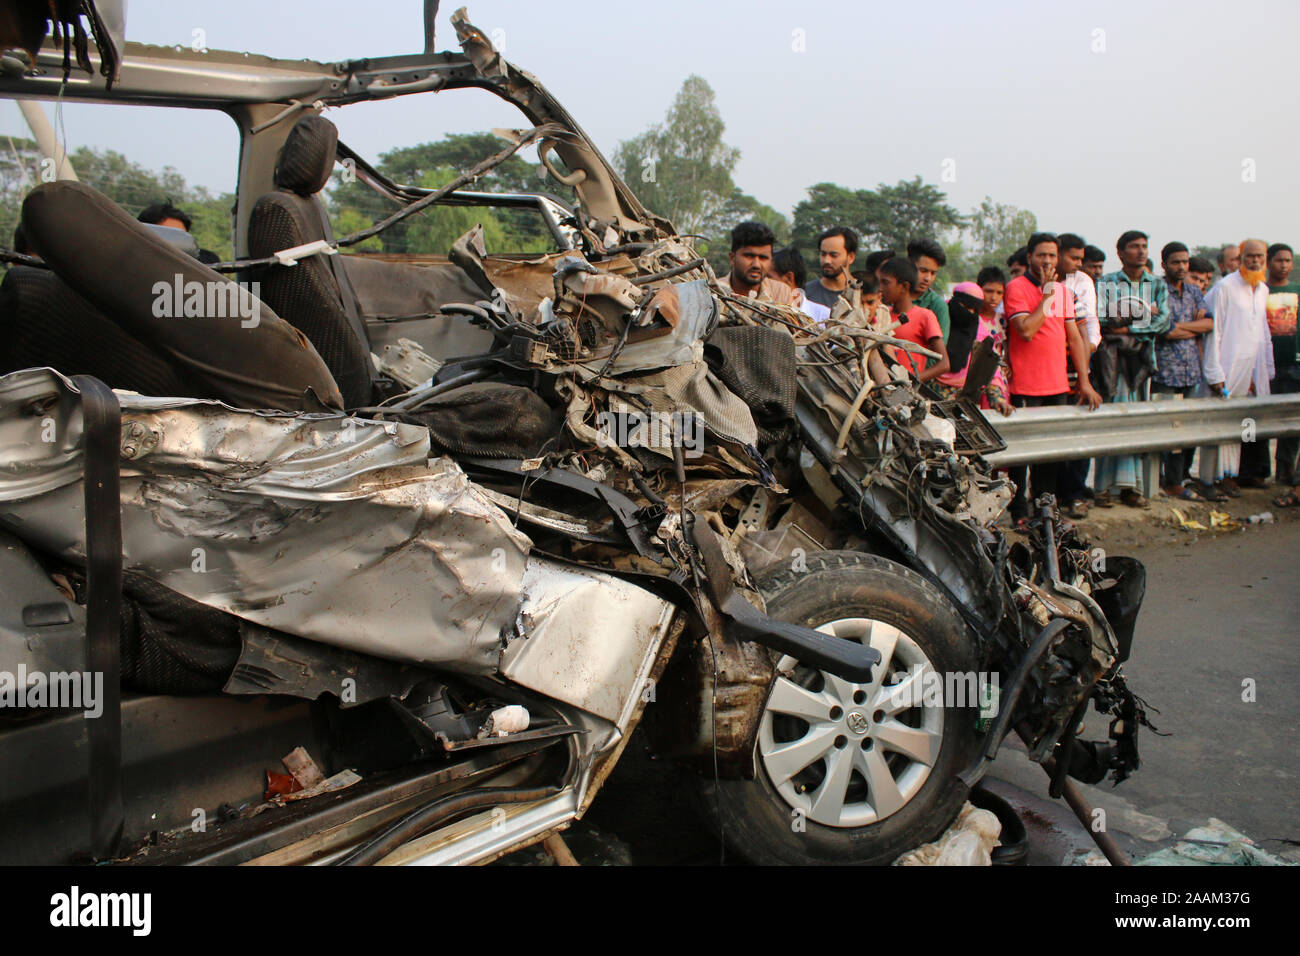 Wreckage of a microbus seen after a bus hit it head-on at the Dhaka-Mawa Highway in Munshiganj.At least ten people, including two women and two children, were killed and four others injured as a bus collides with a microbus. The accident took place on Dhaka-Mawa highway when a microbus carrying a groom’s party was heading towards Dhaka from Munshiganj around 2:00pm. The police official also said that the mishap occurred as the speeding bus of Swadhin Paribahan was overtaking another bus on the road. Stock Photo